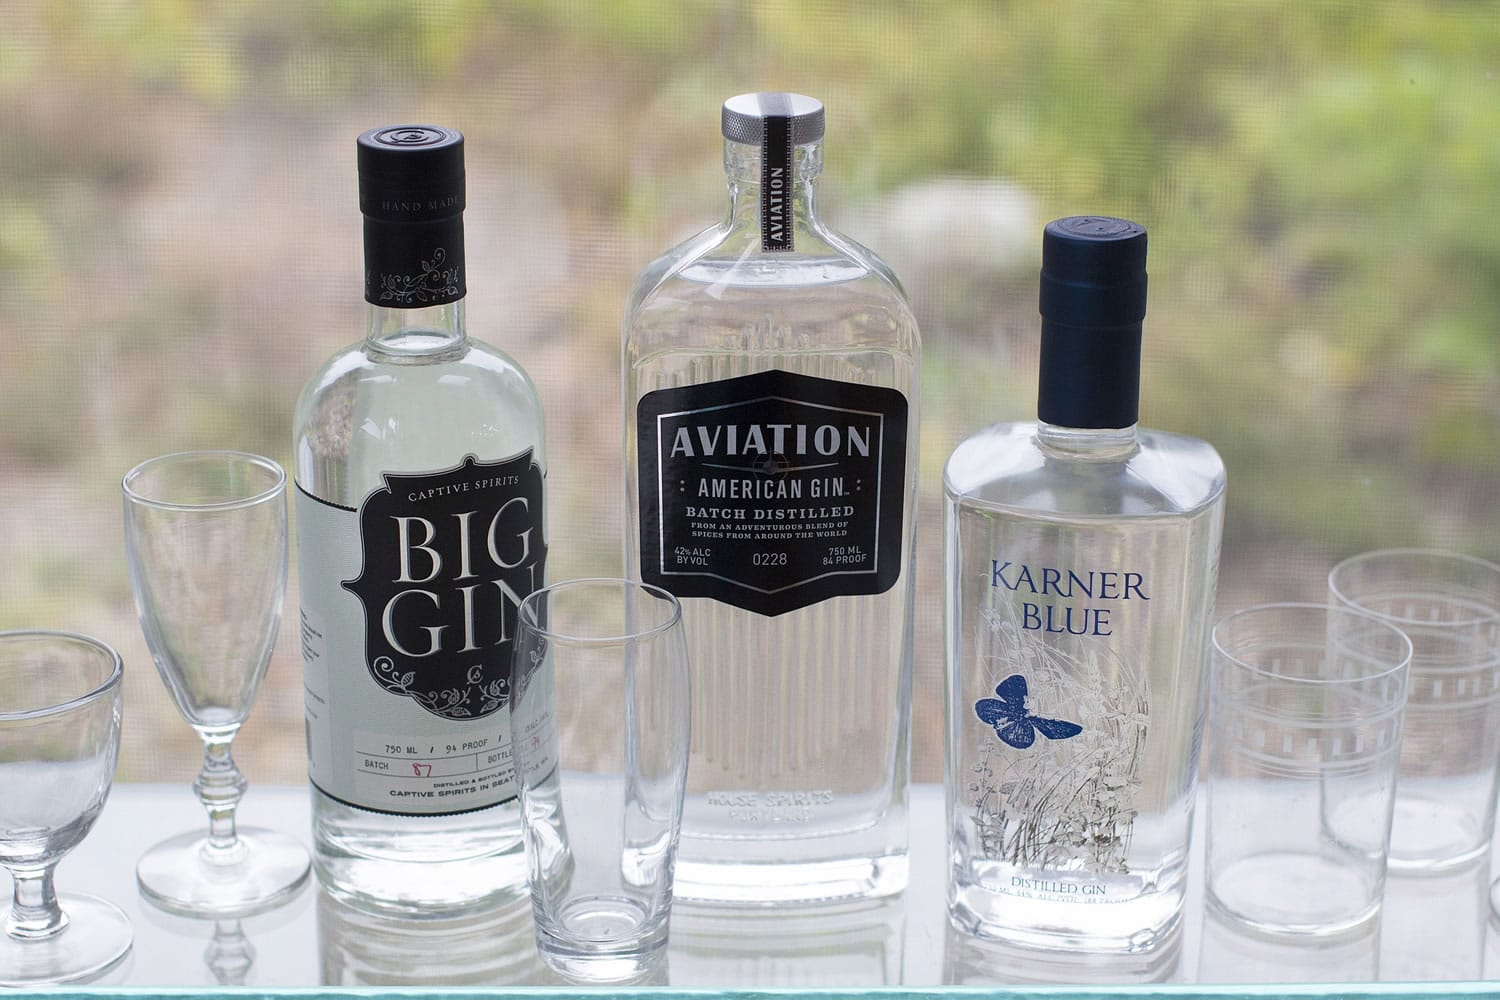 Captive Spirits Big Gin, from left, Aviation American Gin, and Karner Blue Distilled Gin.